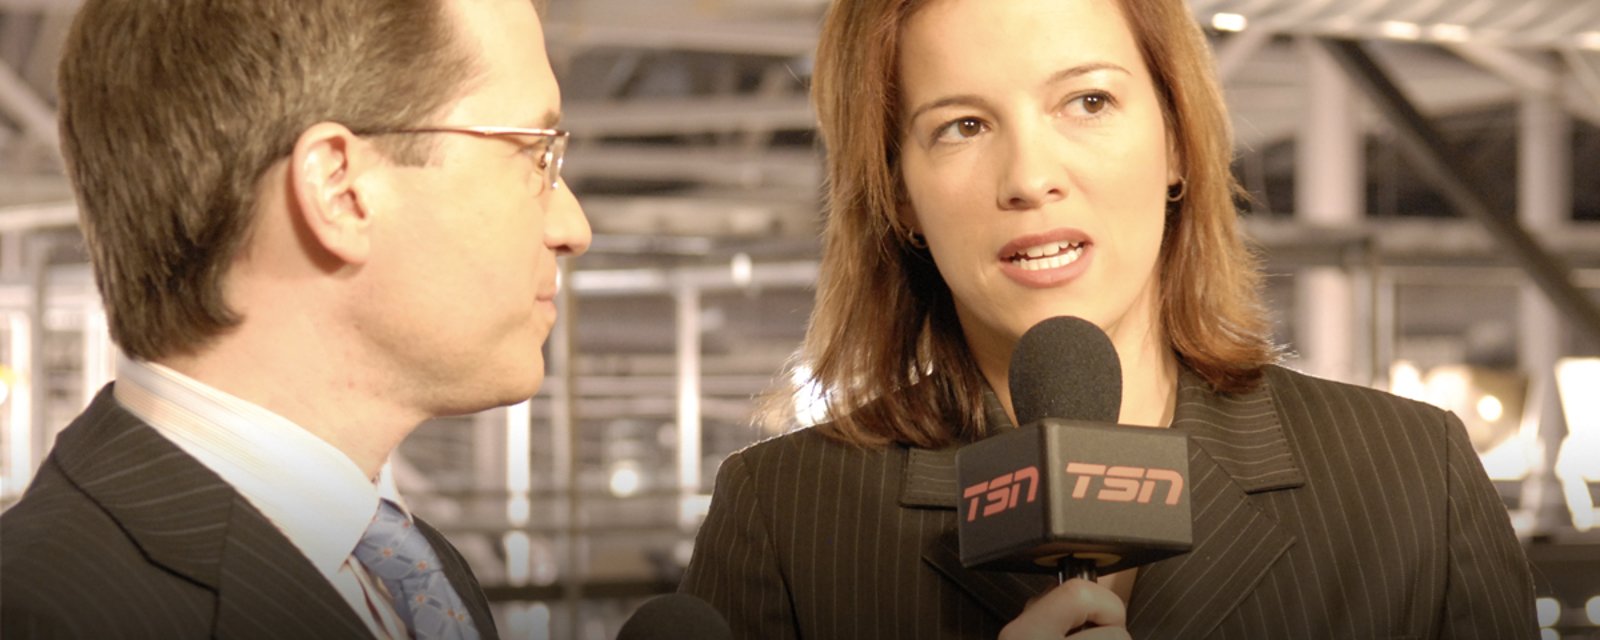 Disgraced hockey journalist forced to apologize for sexist remarks on social media